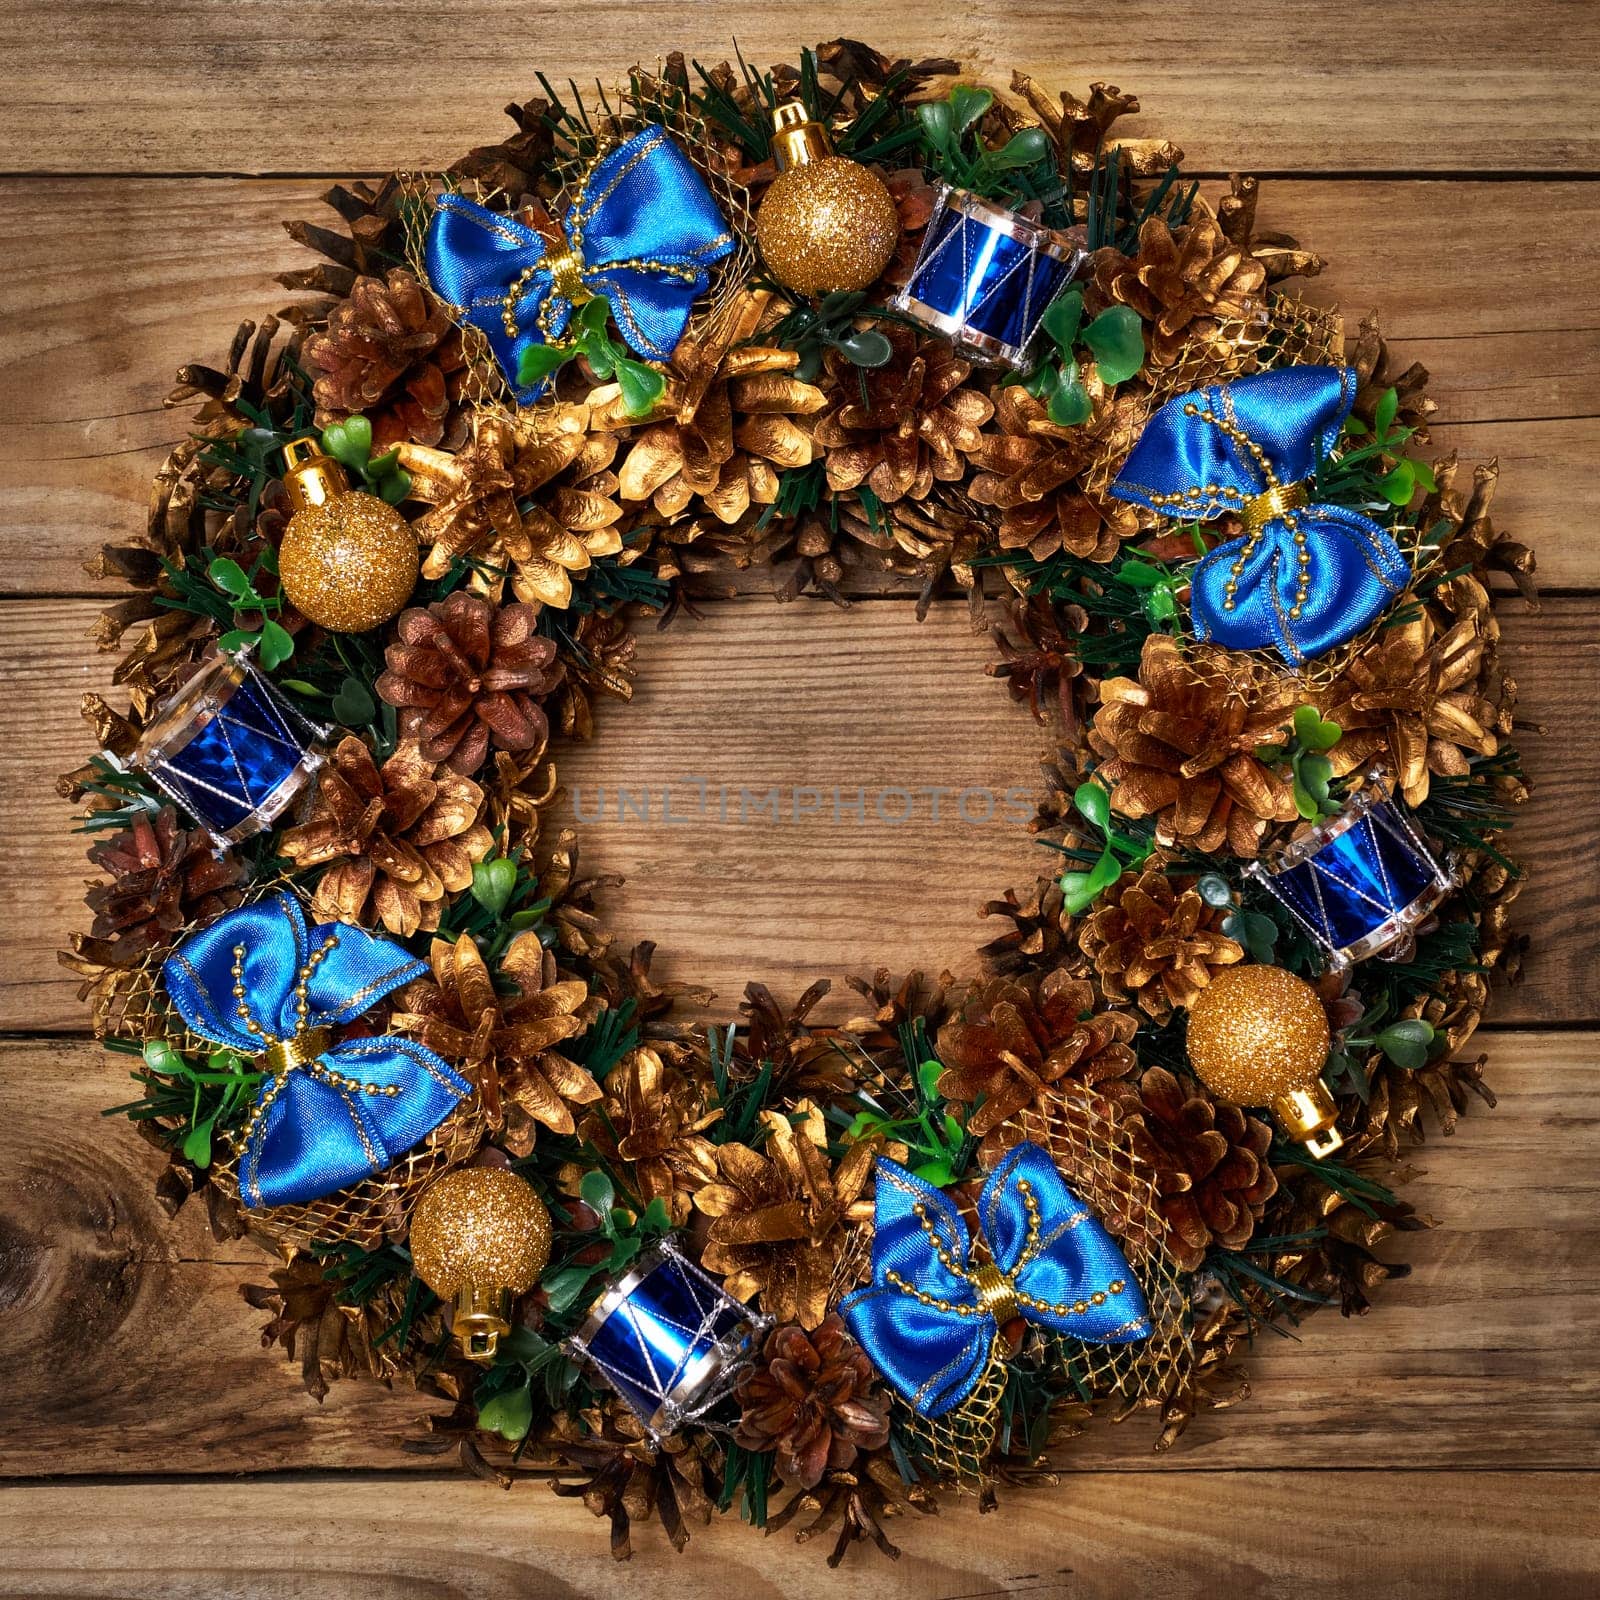 Christmas wreath top view by dimol